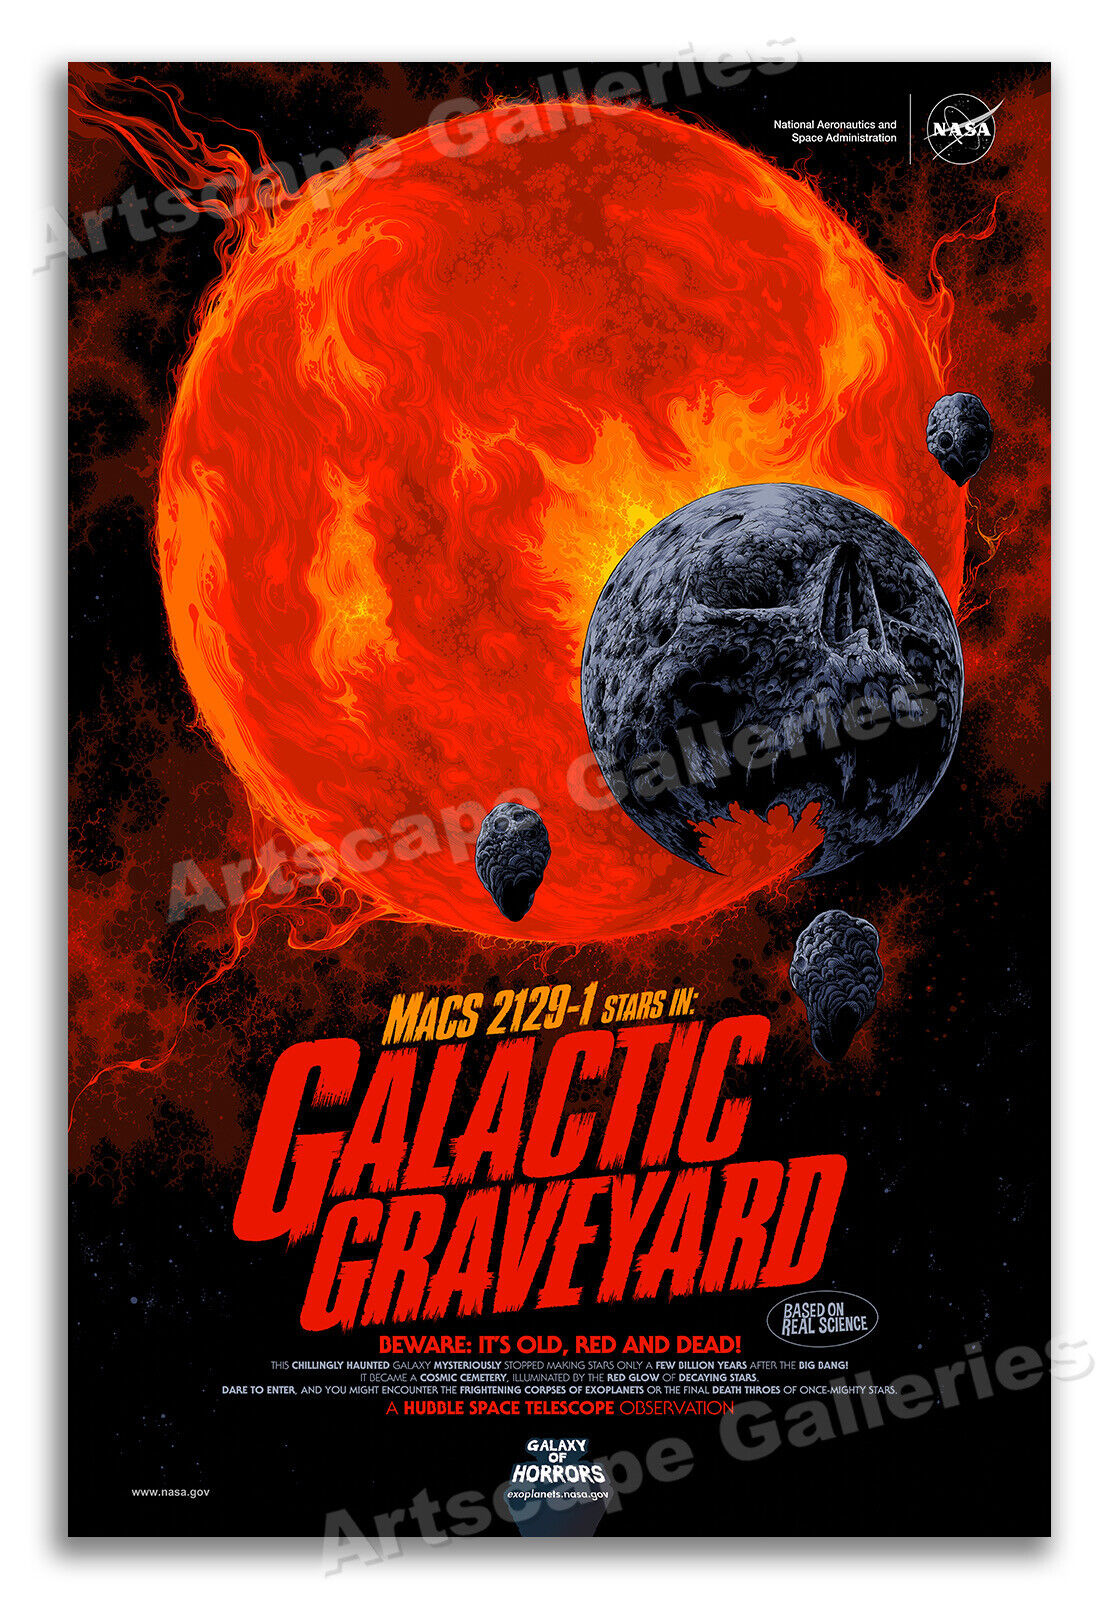 NASA Space Horror Movie Style Poster - Galactic Graveyard  - 16x24